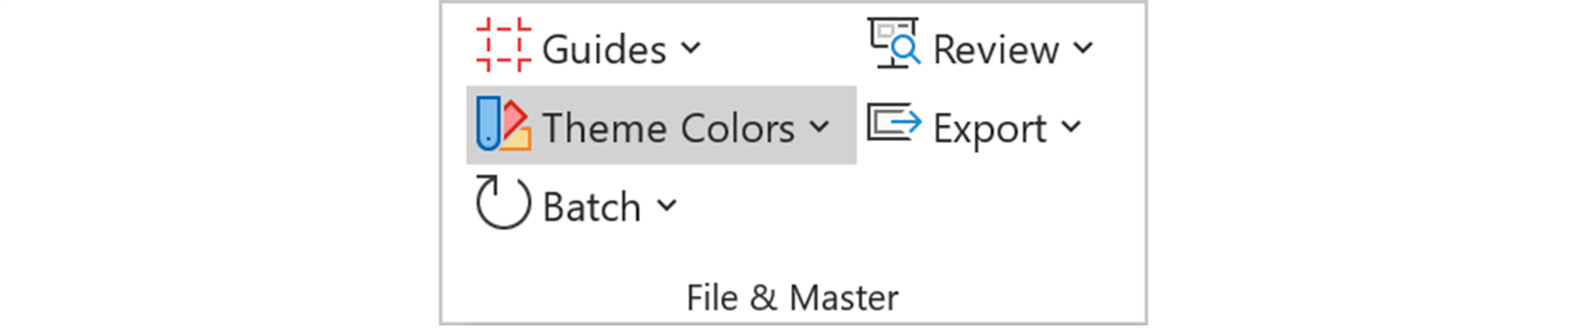 Screenshot of Theme colors feature in the BrightSlide tab